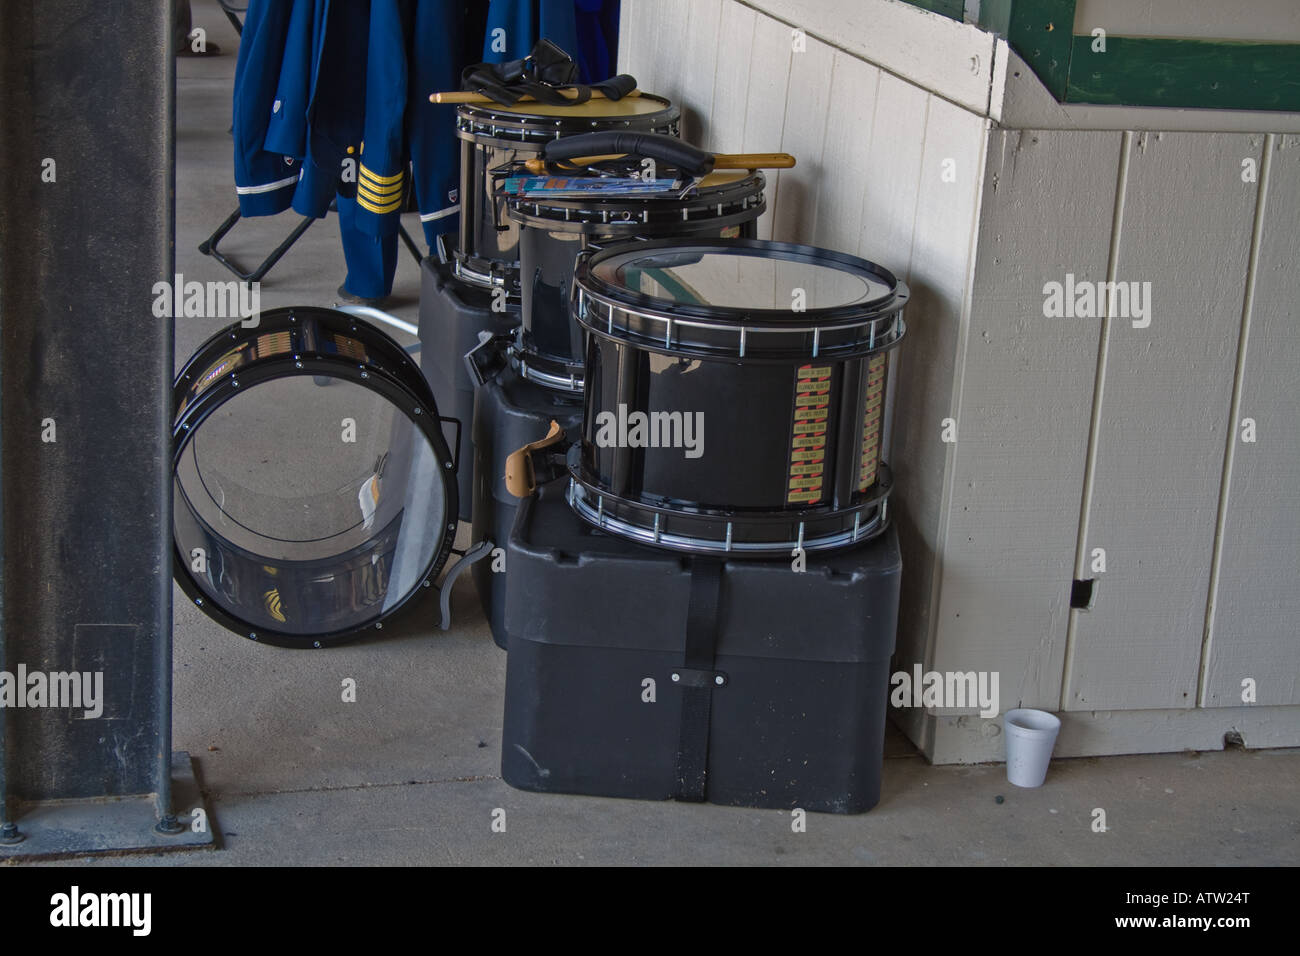 Drums sitting on the floor Stock Photo